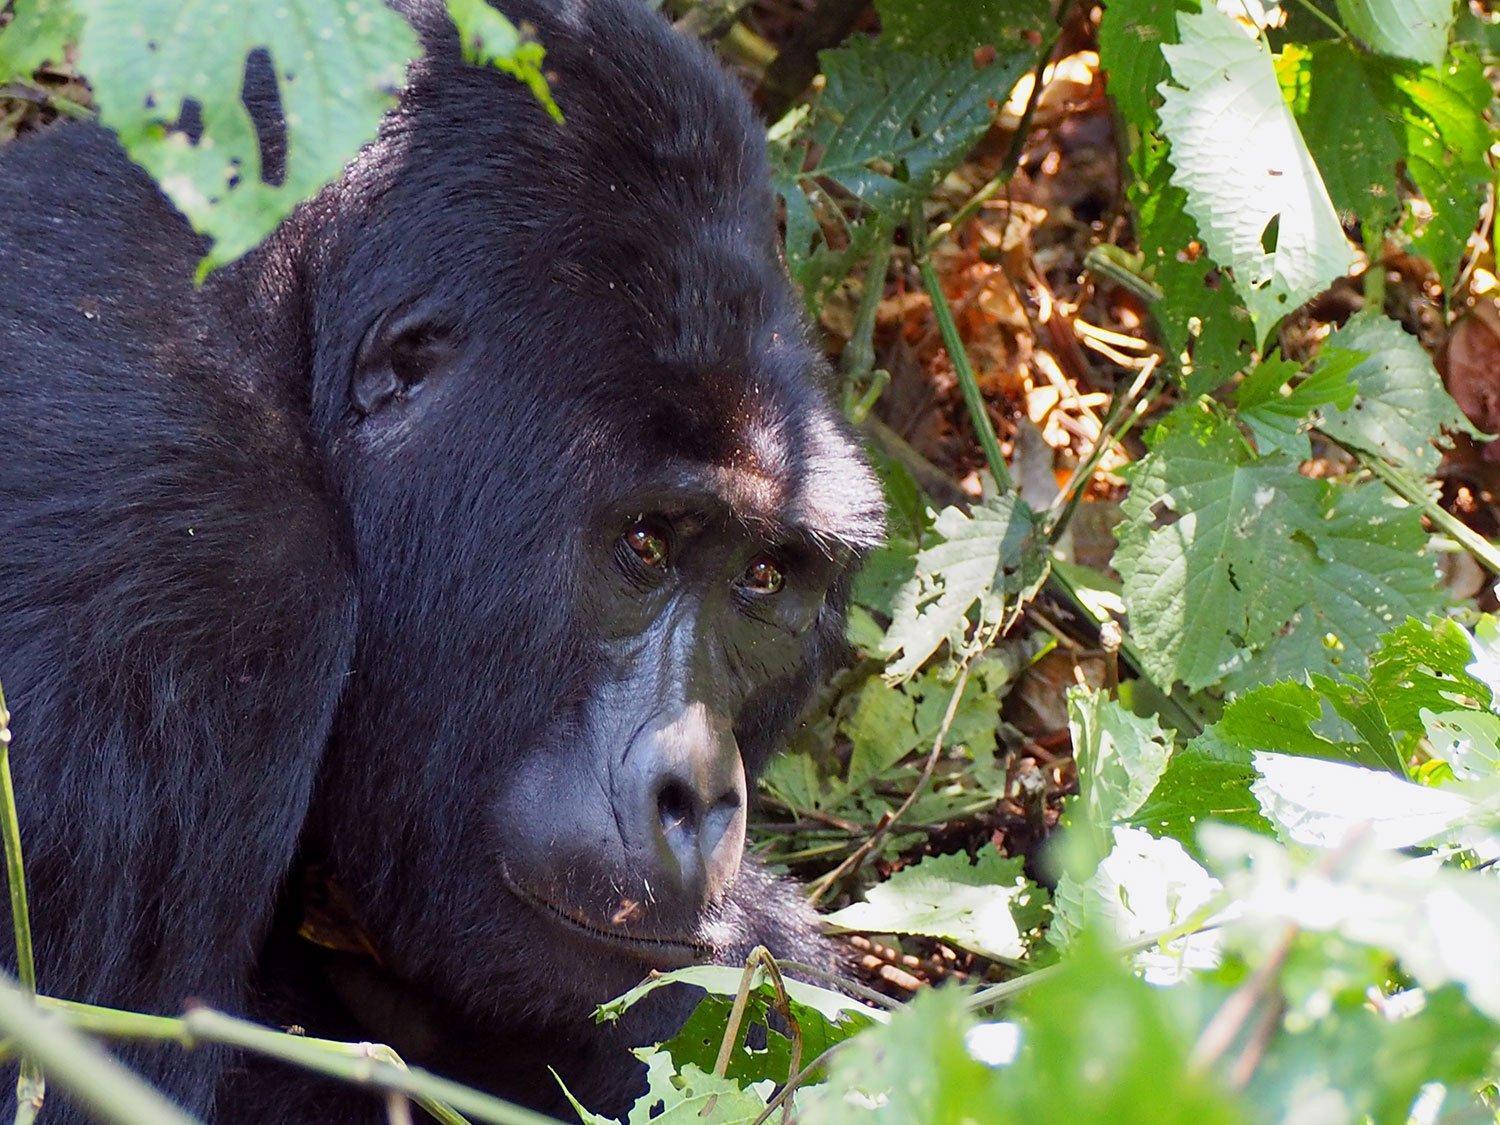 The mountain gorillas of the Impenetrable forest in Uganda